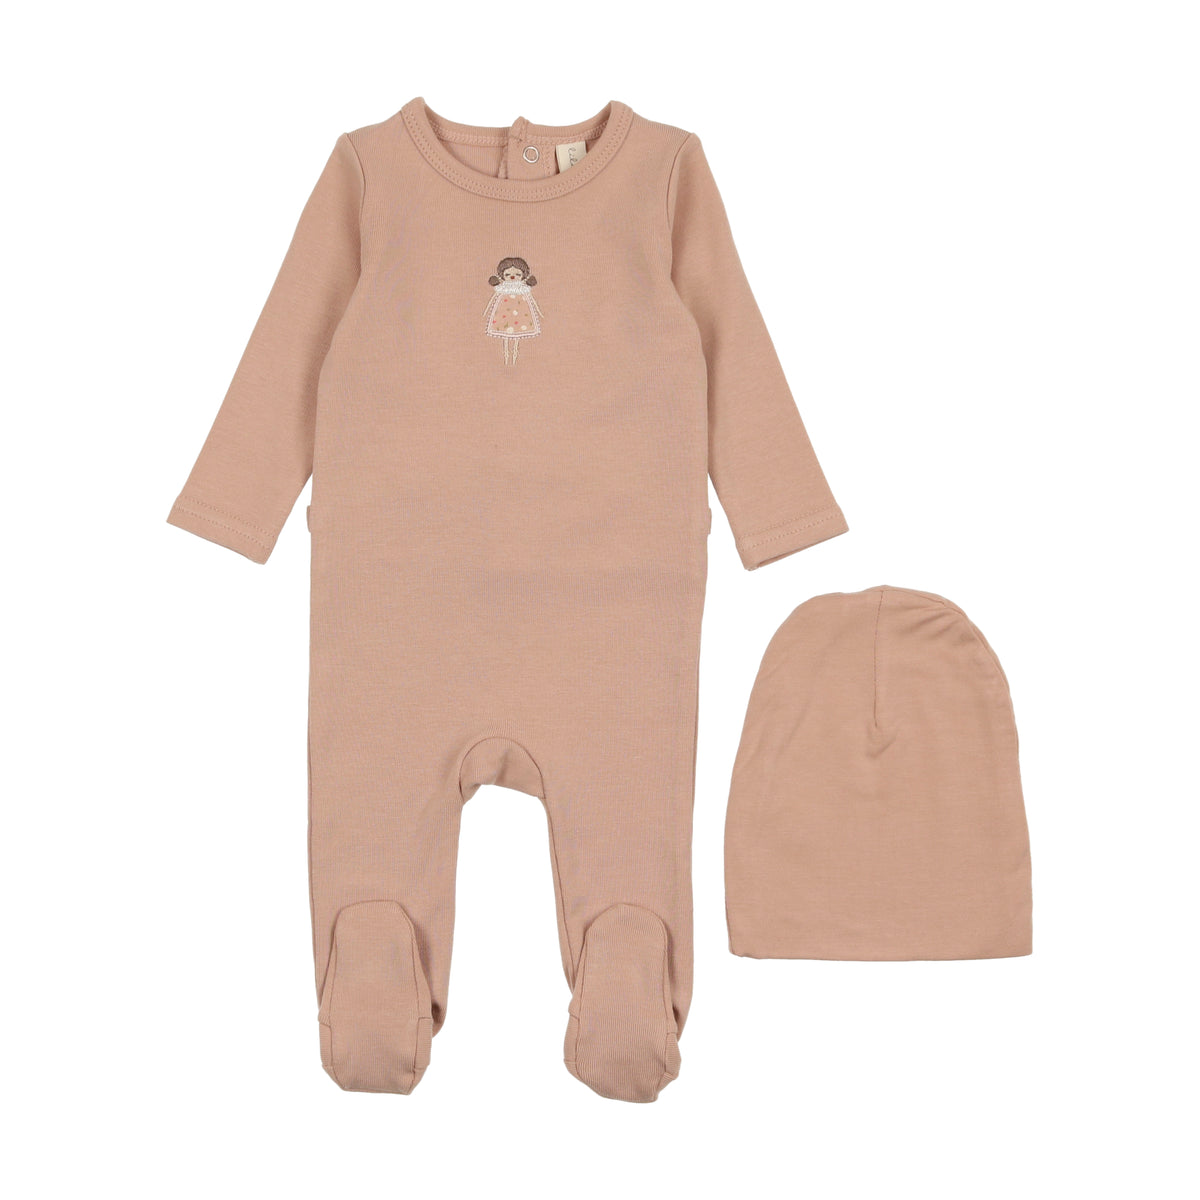 EMBROIDERED FOOTIE SET – Lil Legs Baby